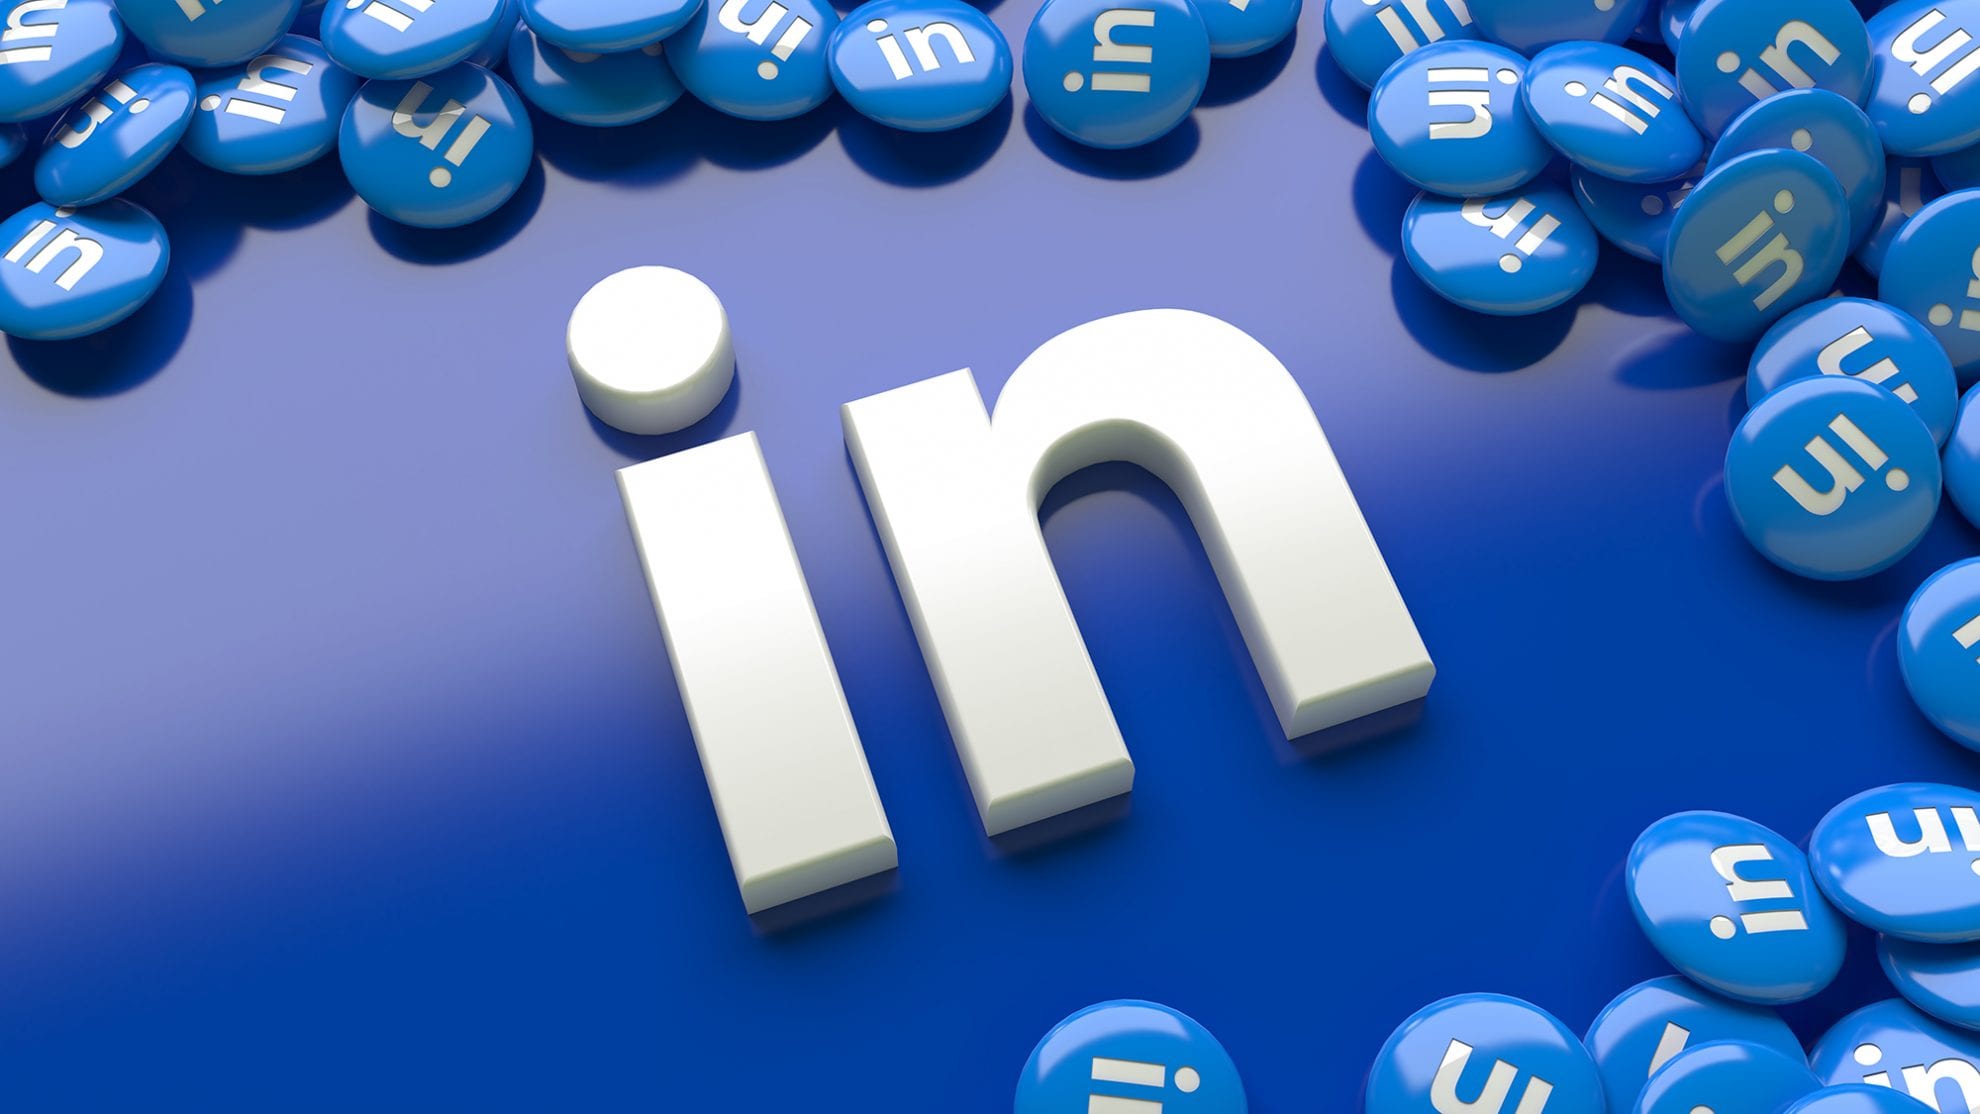 3d linkedin logo over a blue background surrounded by a lot of linkedin glossy pills